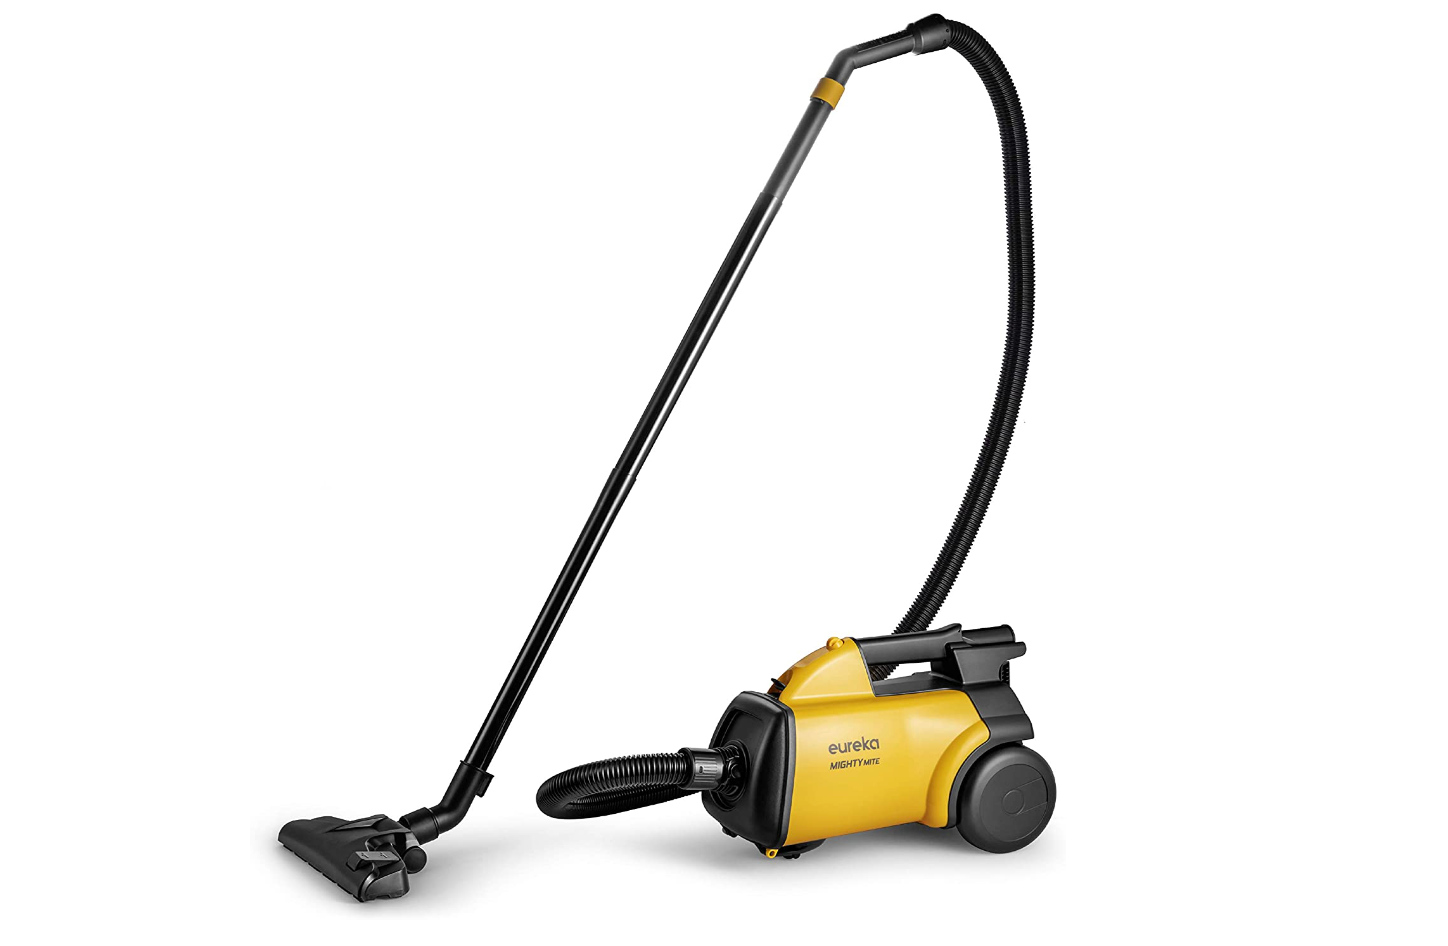 Eureka Mighty Mite 3670M product image of a small yellow vacuum with black details.